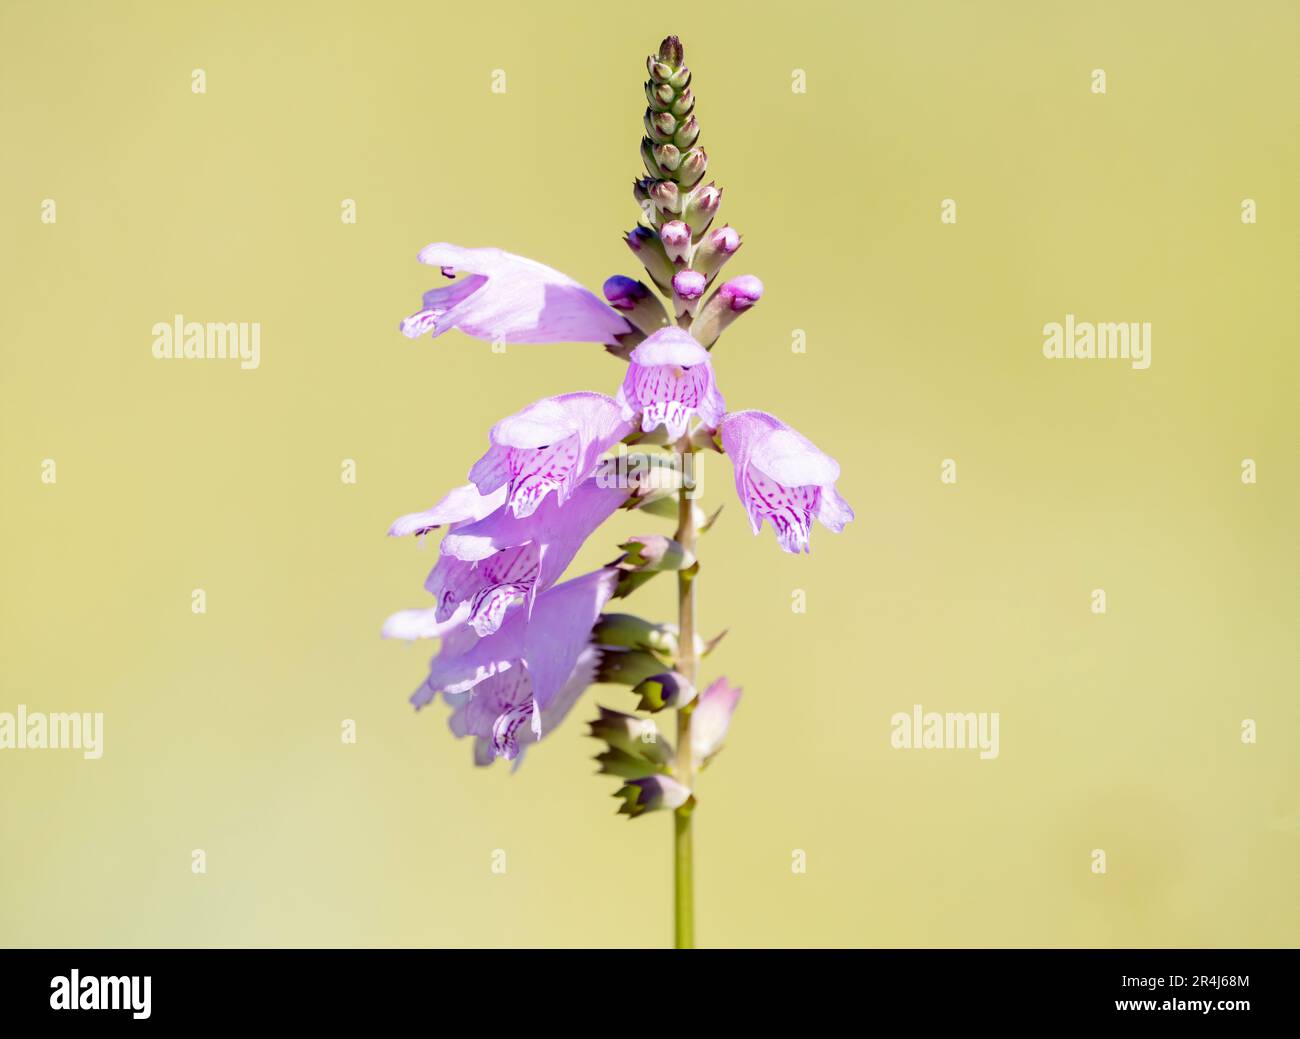 A flowering obedient plant, physostegia virginiana flowering with multiple buds at the top of the stalk. Stock Photo